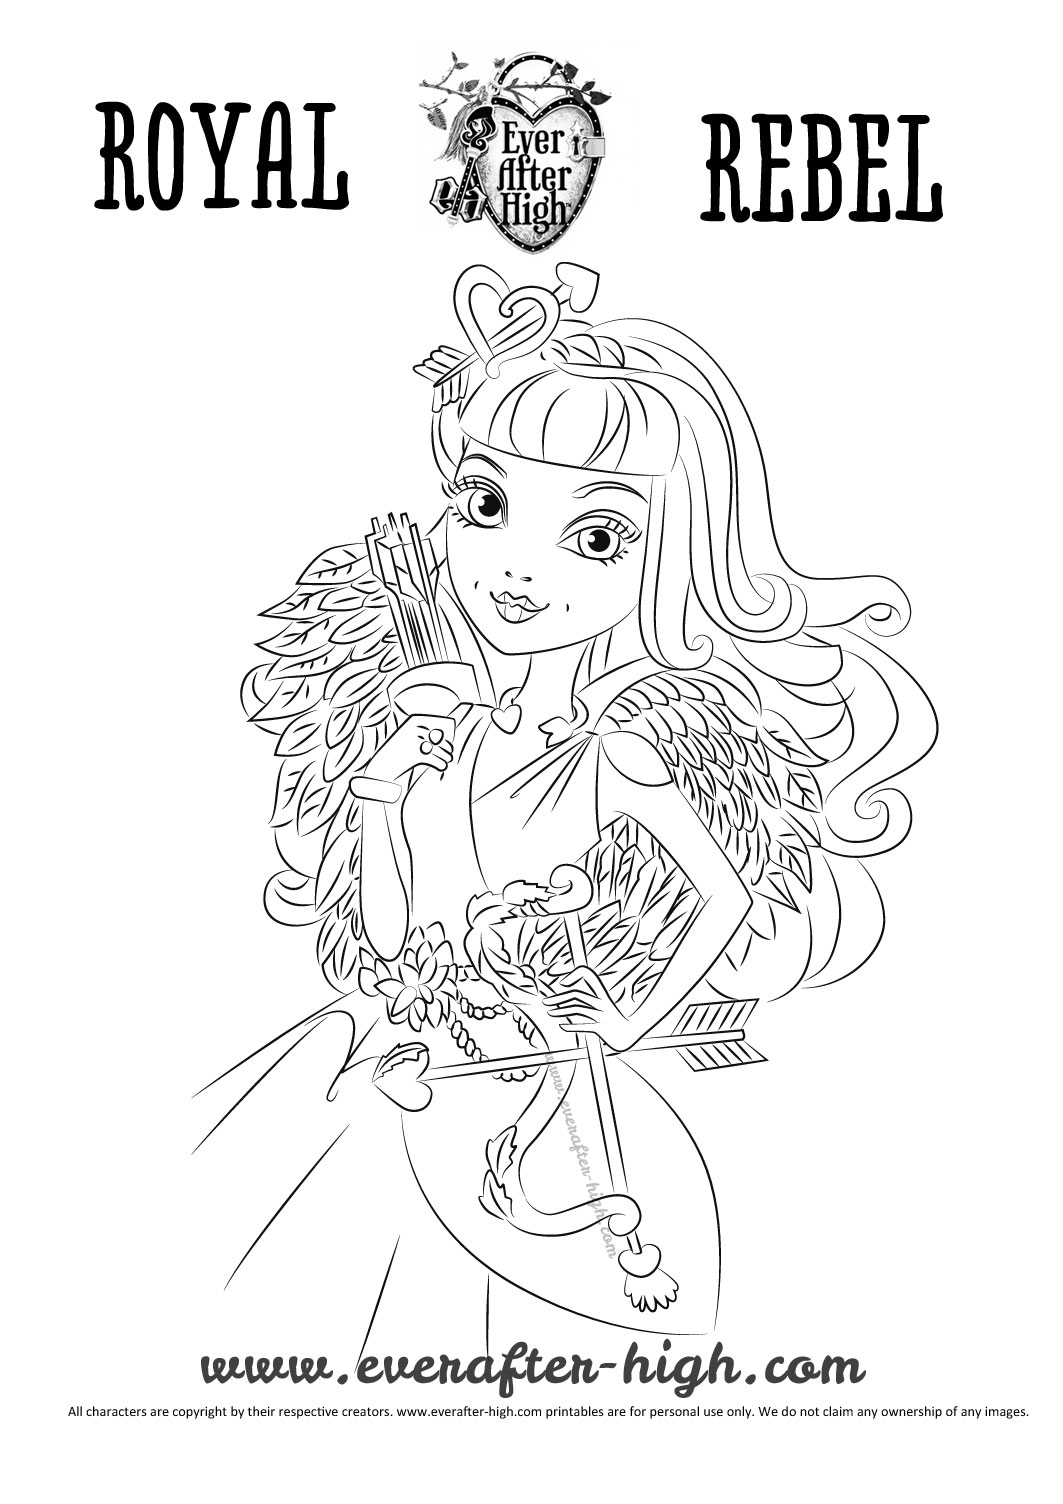 Ever After High : Personnage Apple White (Fille de Blanche neige)